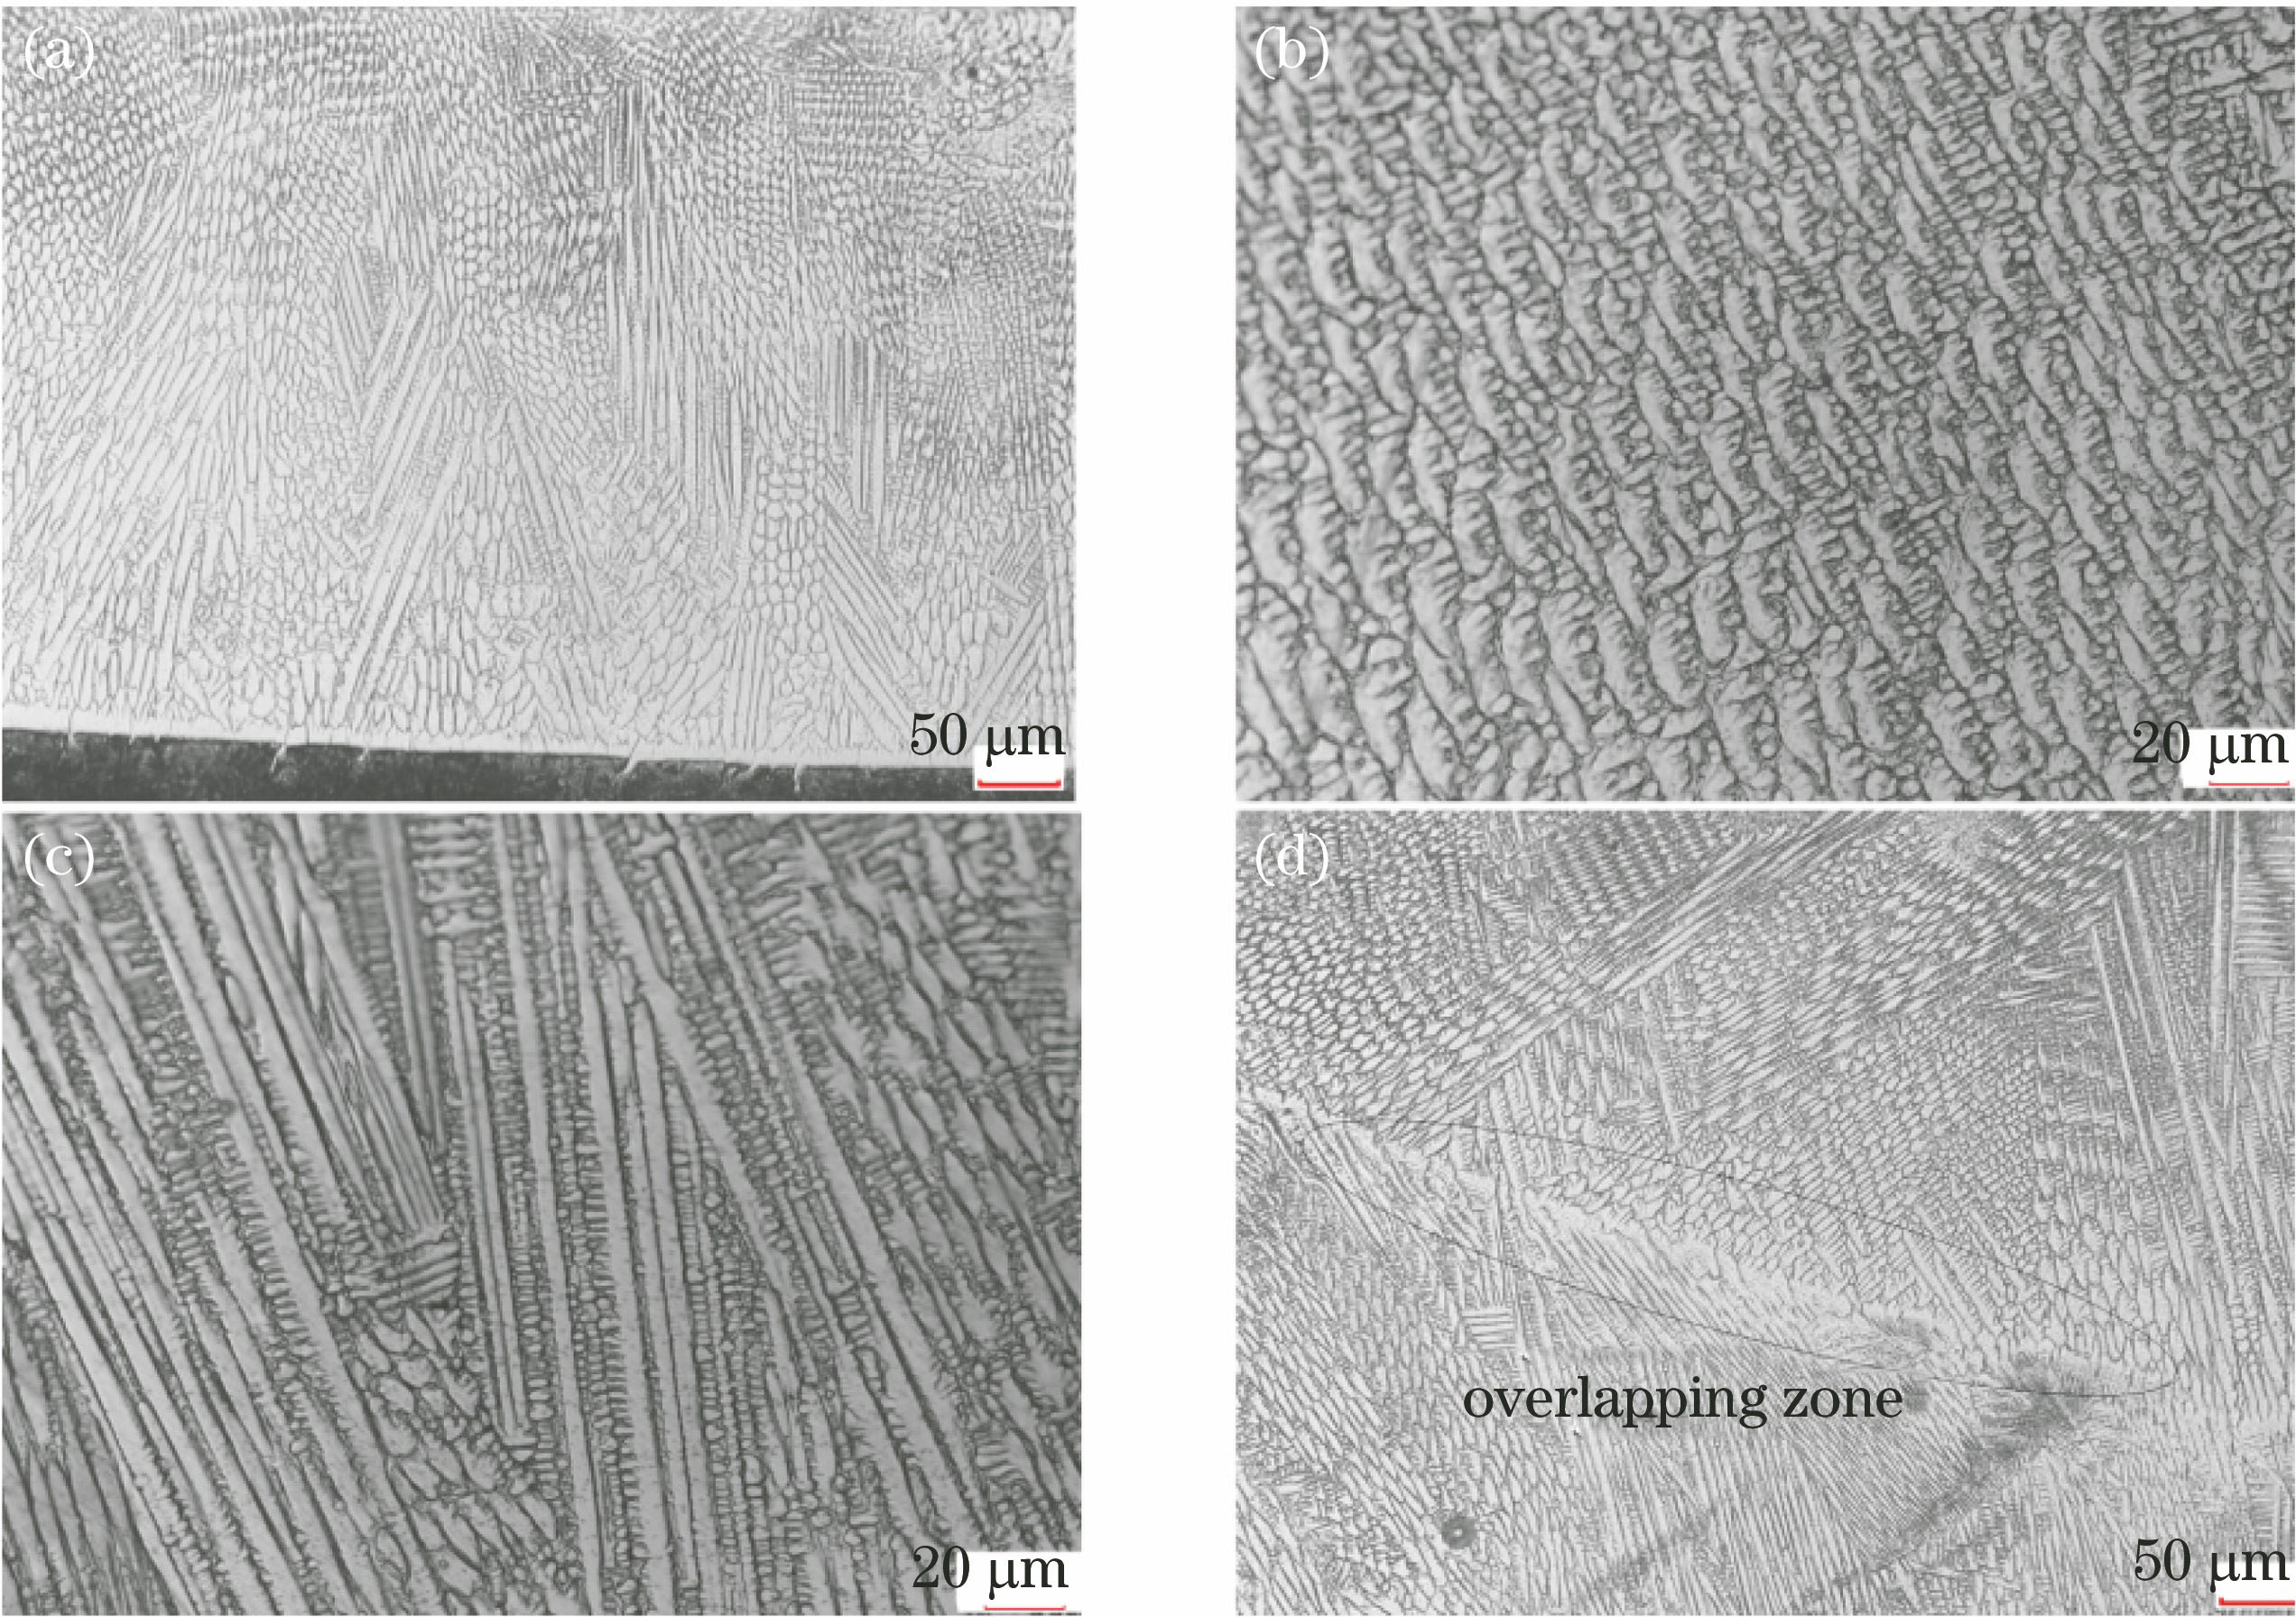 Microstructures of 316L coating. (a) Cross-sectional morphology; (b) microstructure of cellular crystal; (b) microstructure of columnar crystal; (d) microstructure of overlapping zone